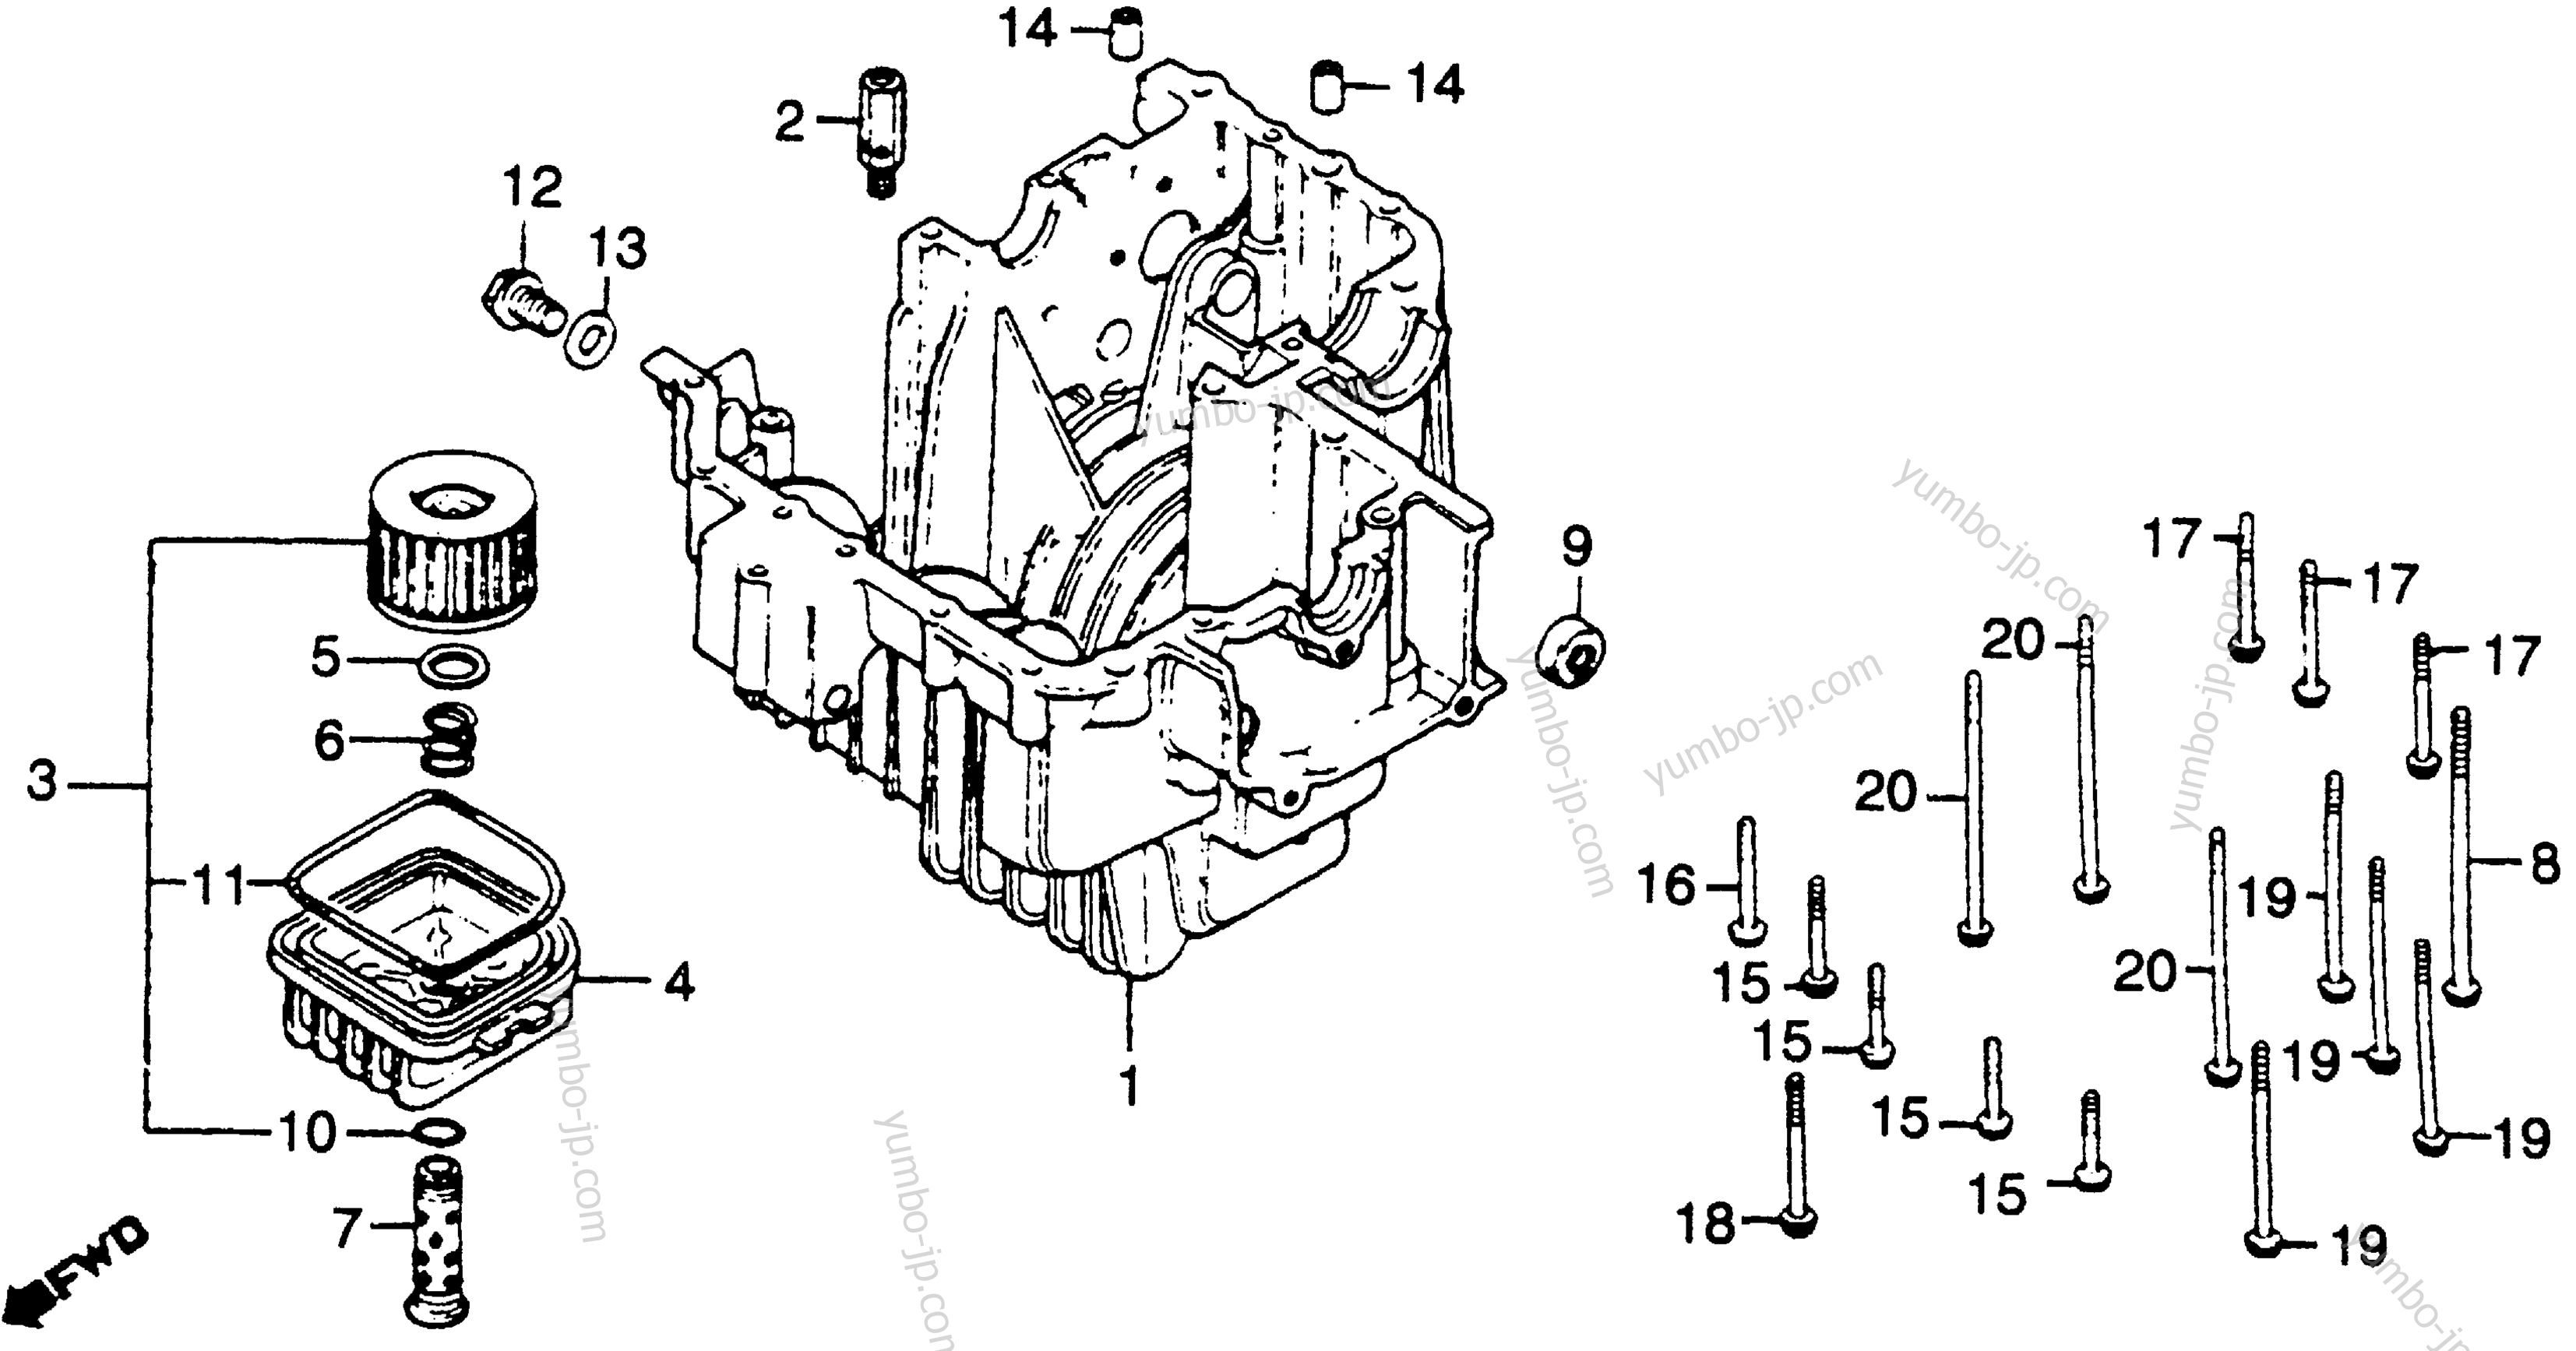 LOWER CRANKCASE for motorcycles HONDA CM400E A 1981 year